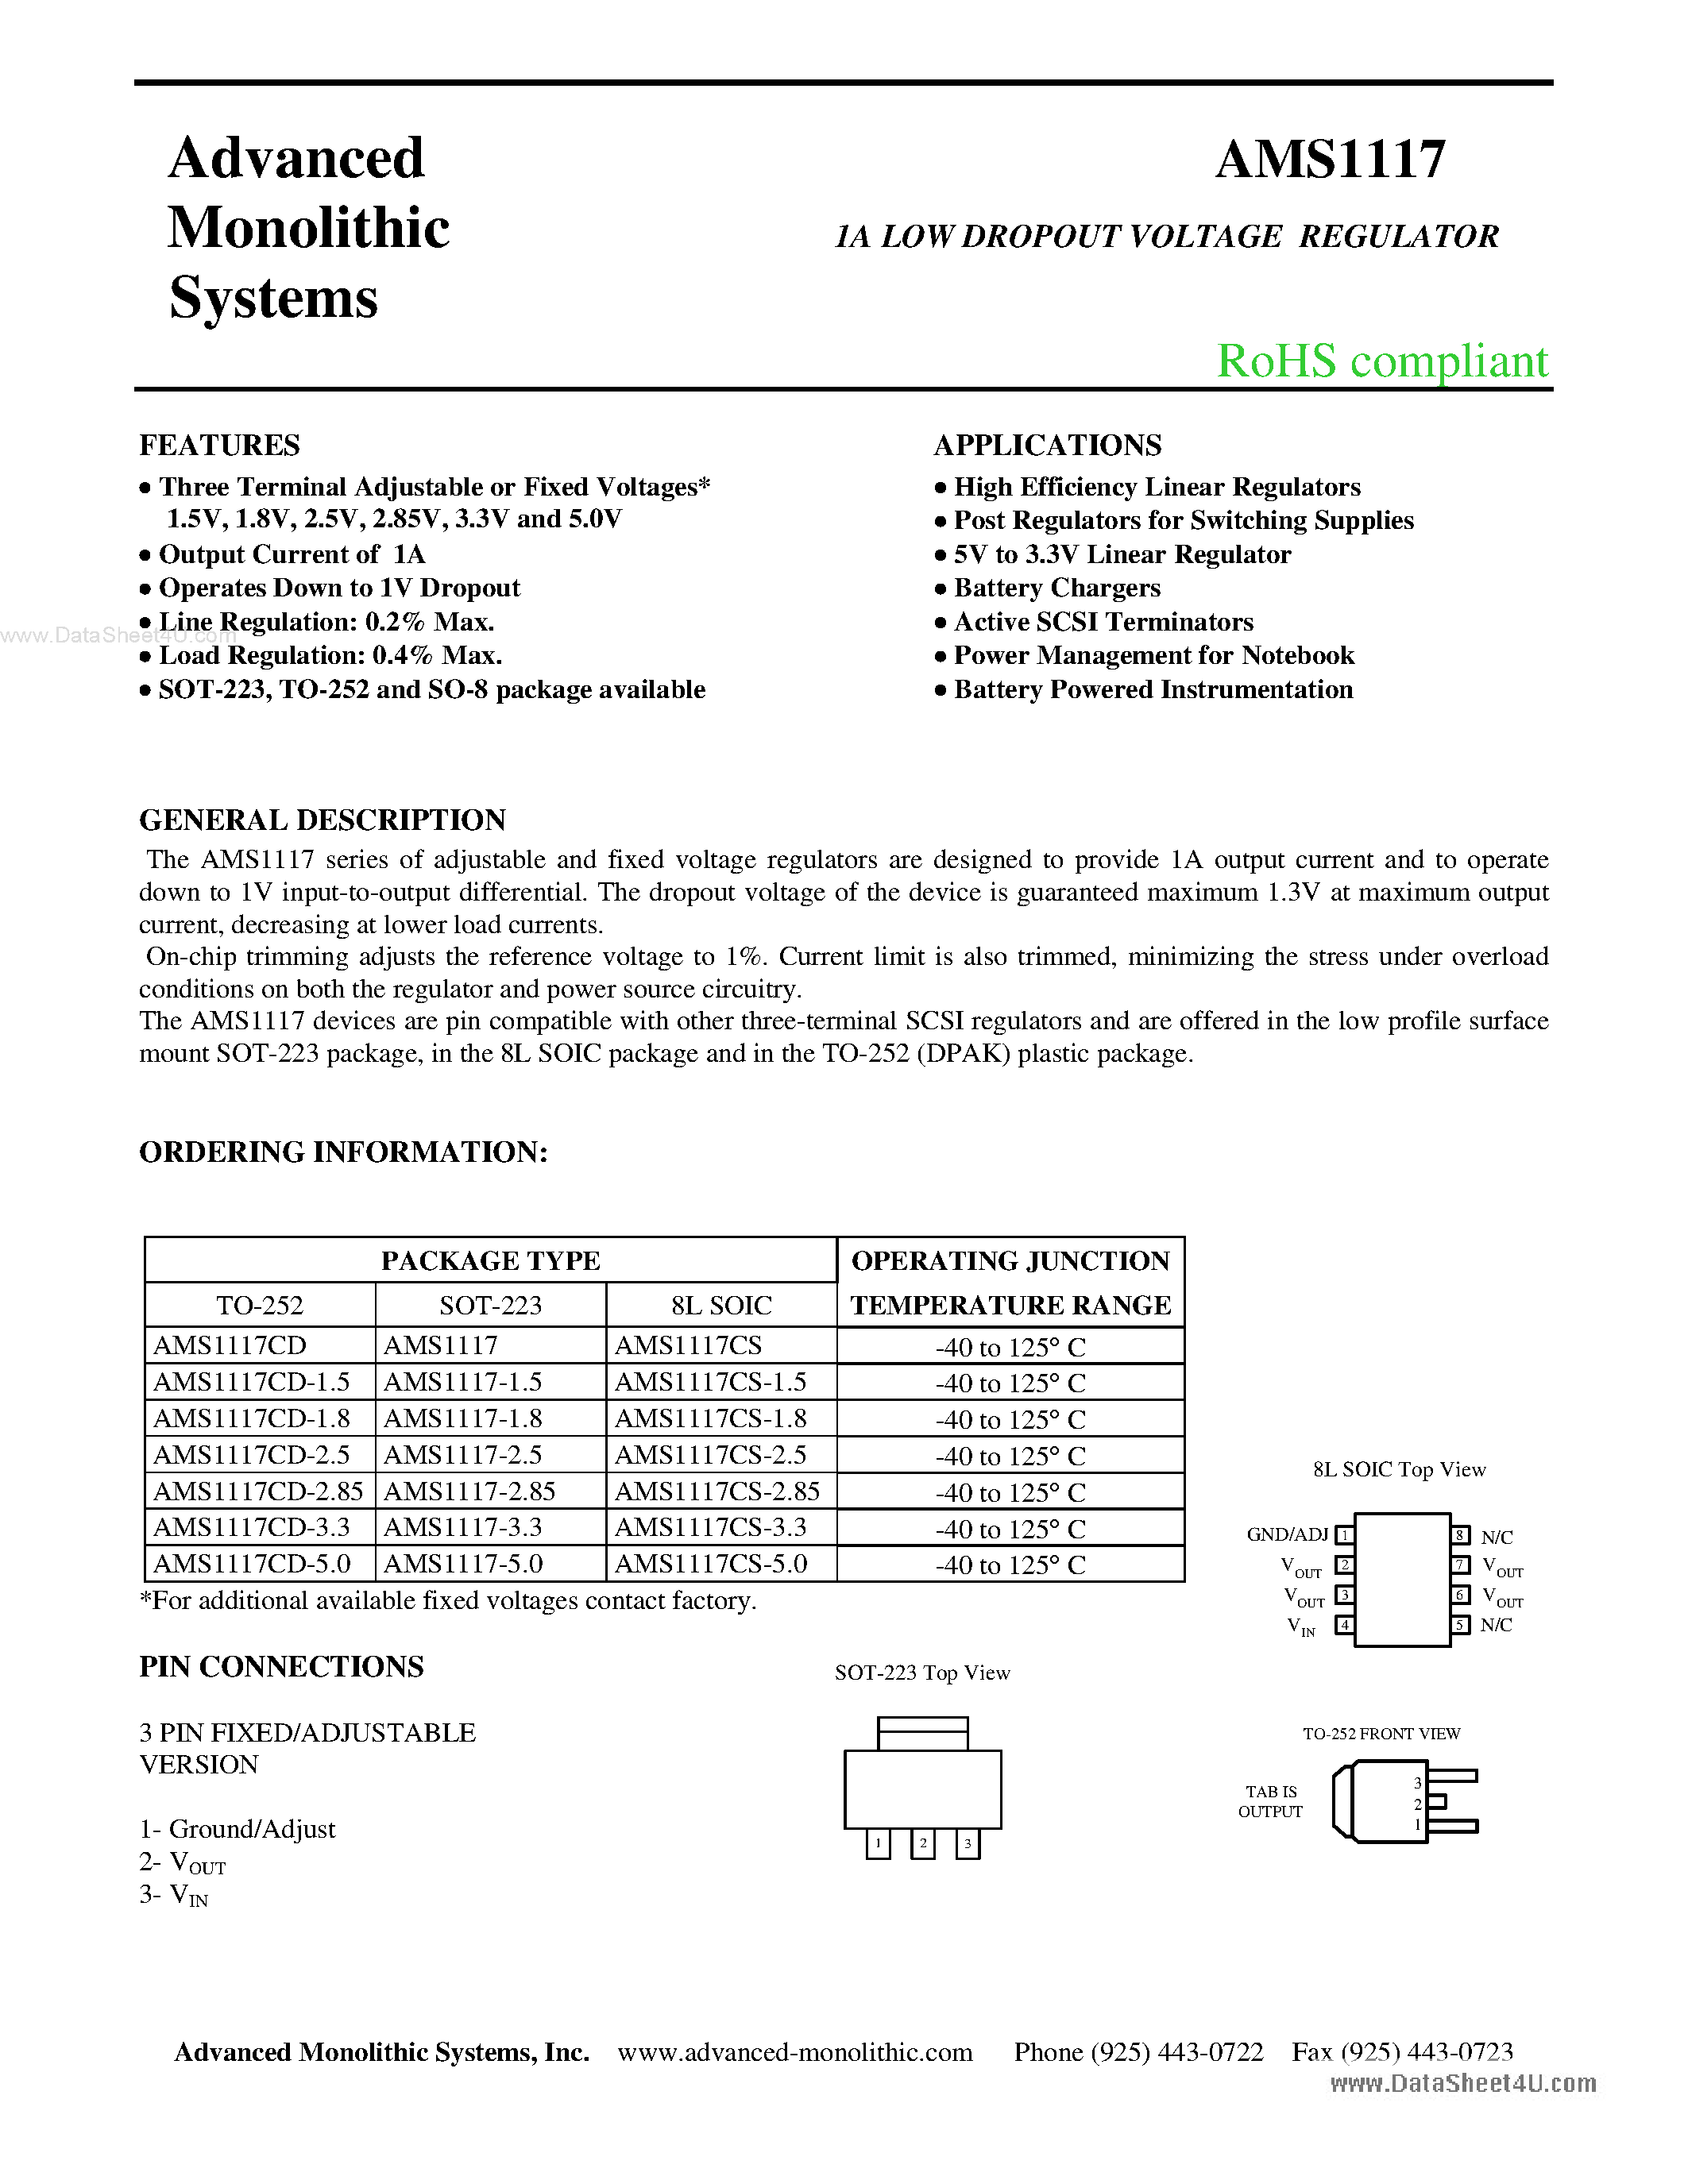 Datasheet 1117CD-1.8 - Search -----> AMS1117CD-1.8 page 1